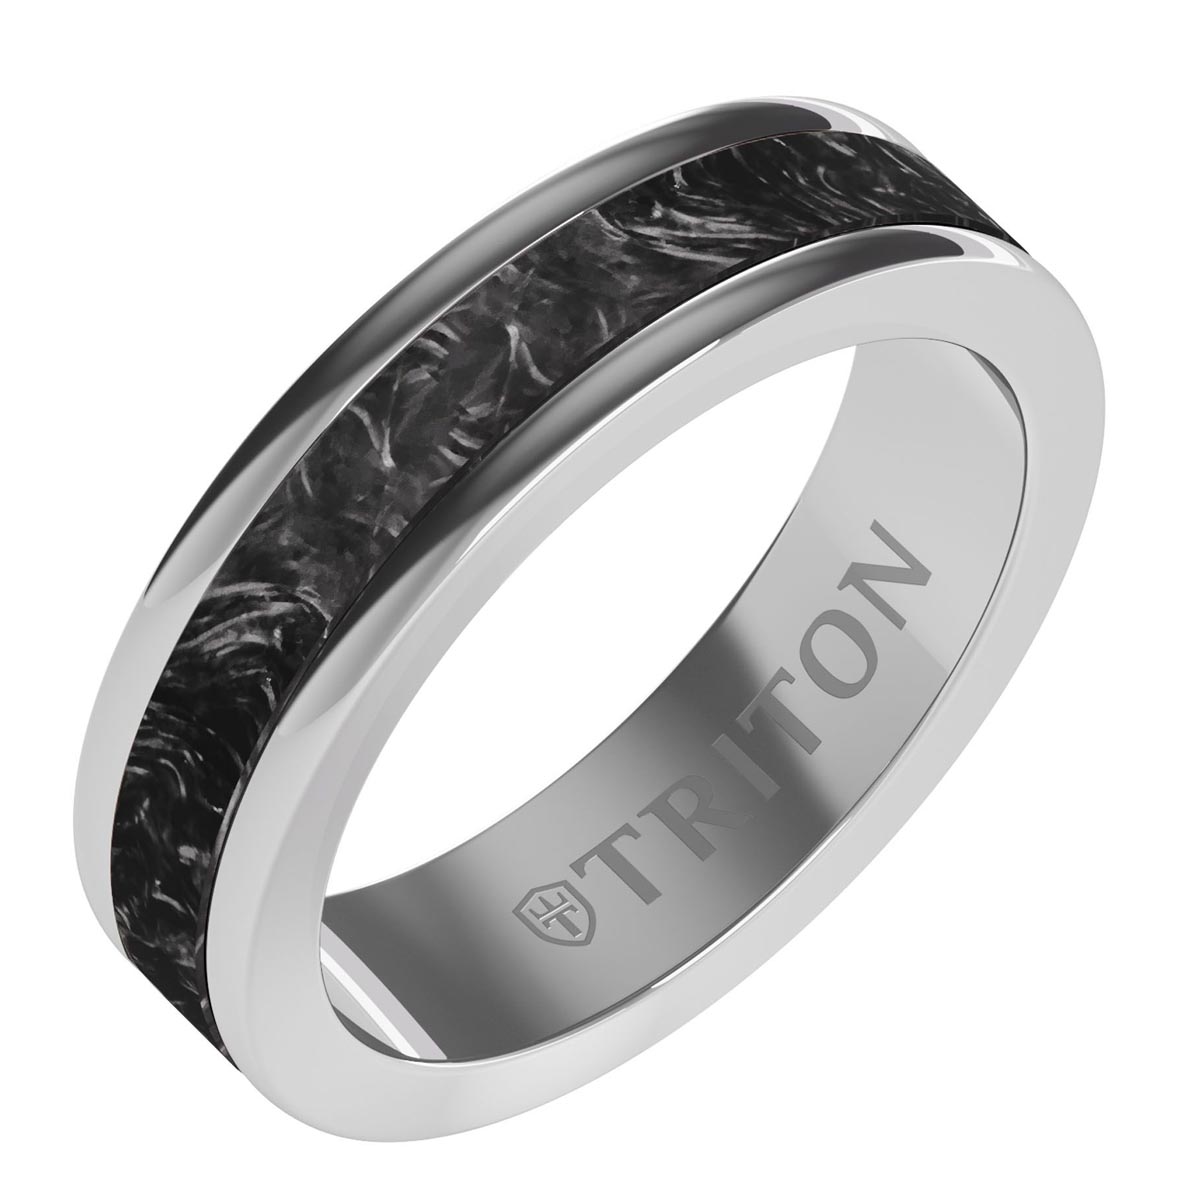 Triton Mens Wedding Band in Gray Tungsten and Carbon Fiber (6mm)